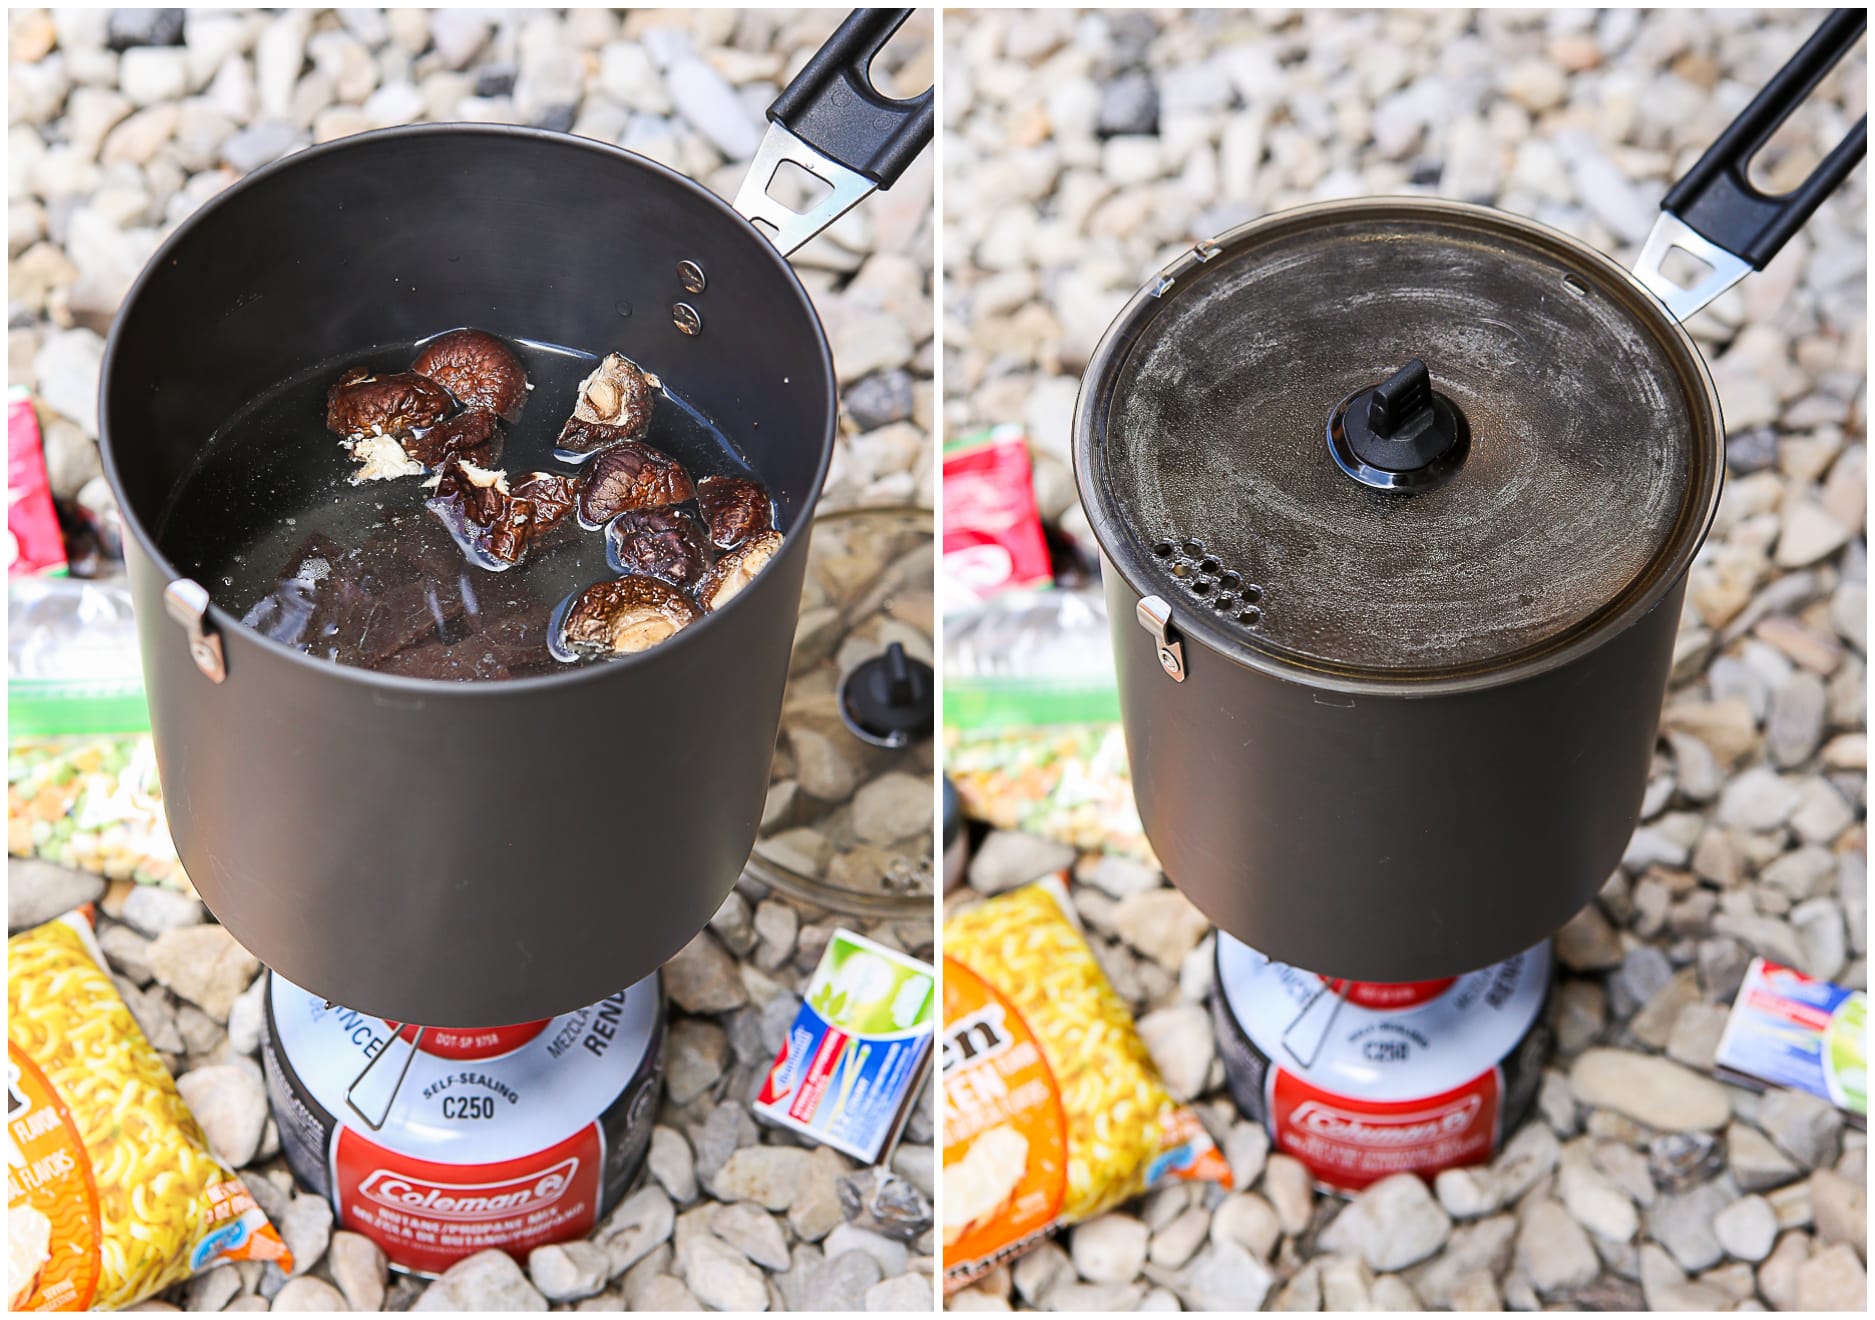 hydrating mushrooms and jerk in camp pot